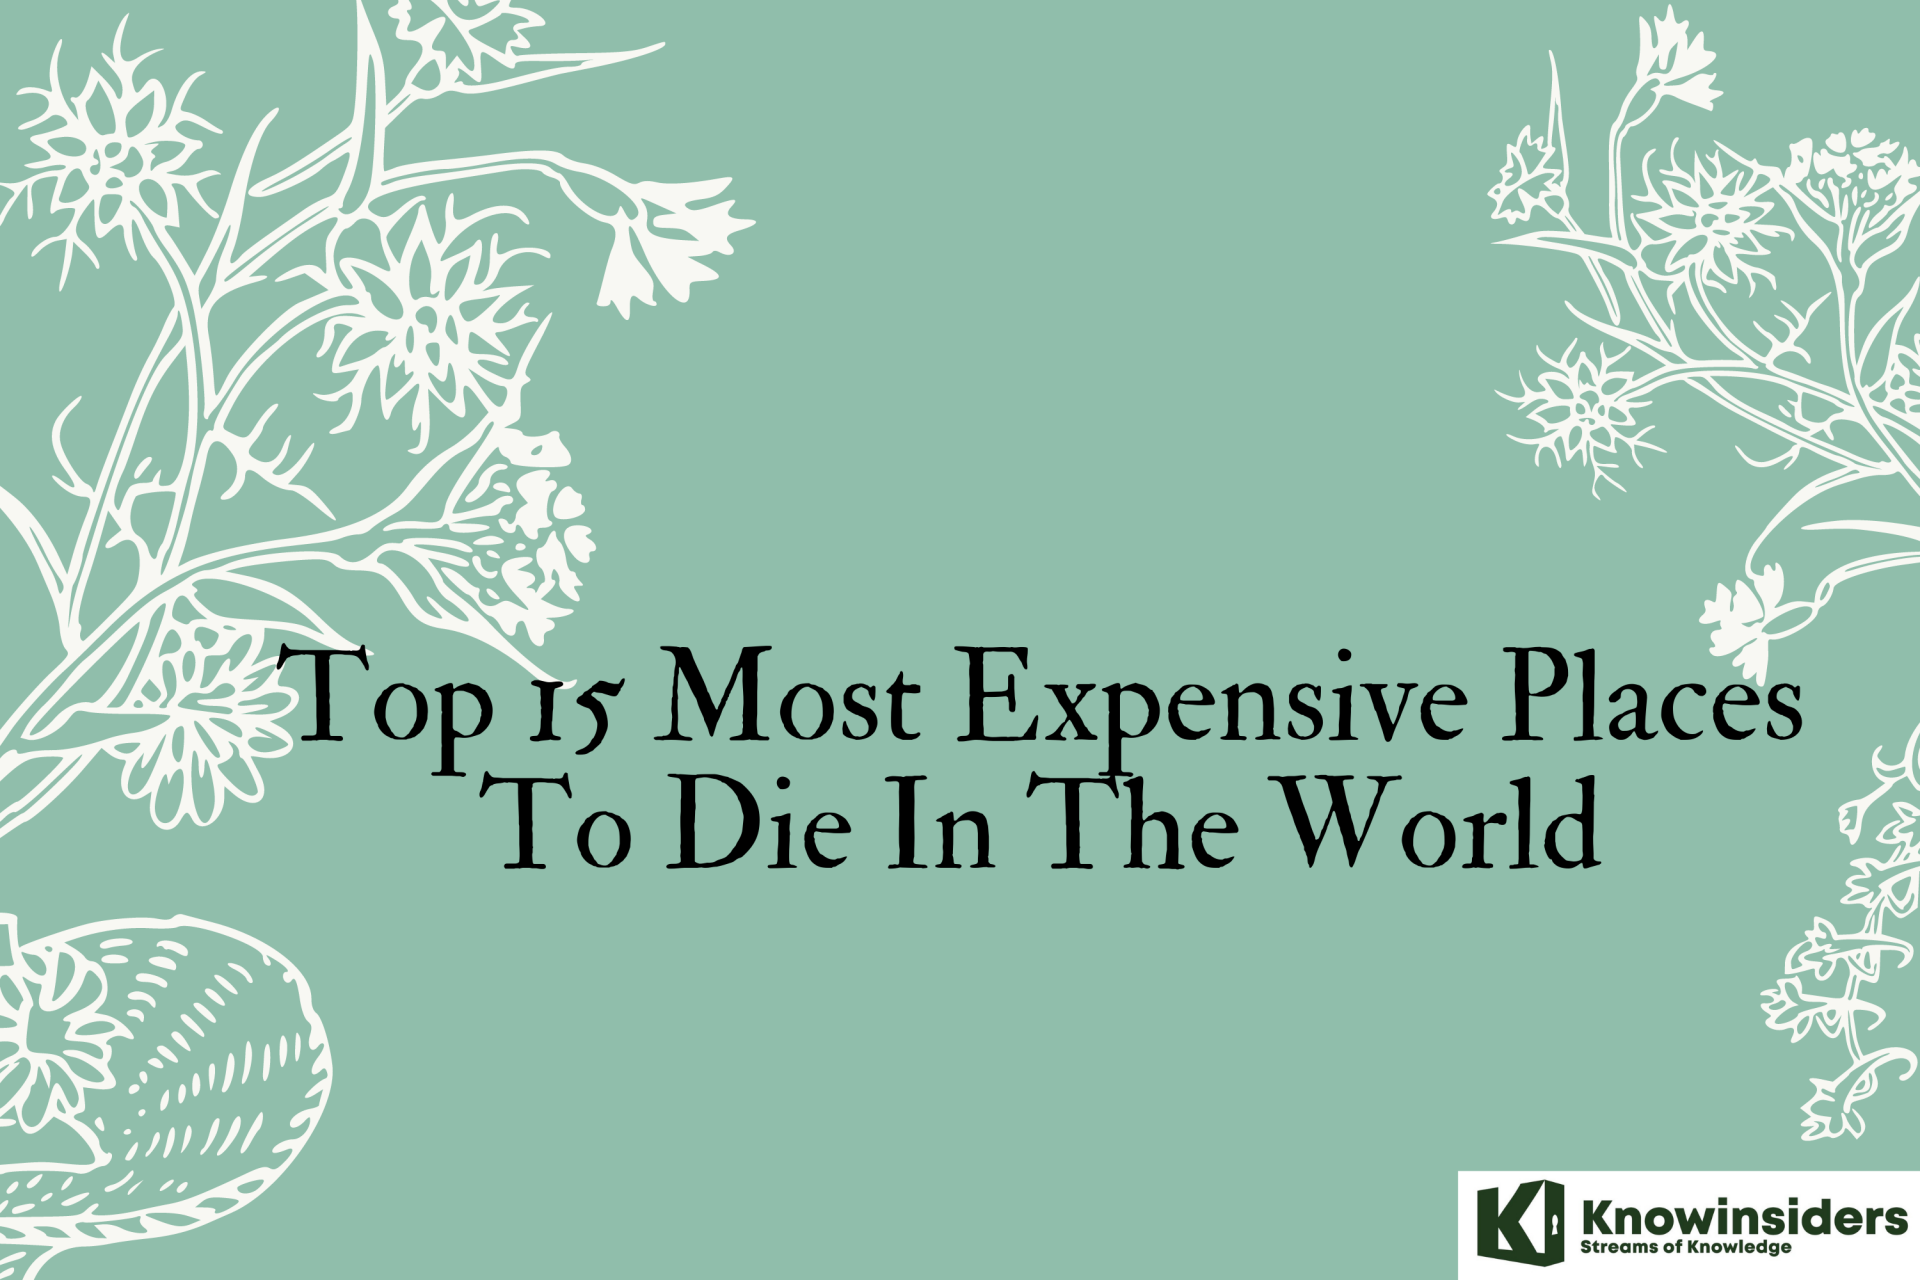 Funeral Costs In The World: Top 15 Most Expensive Places To Die